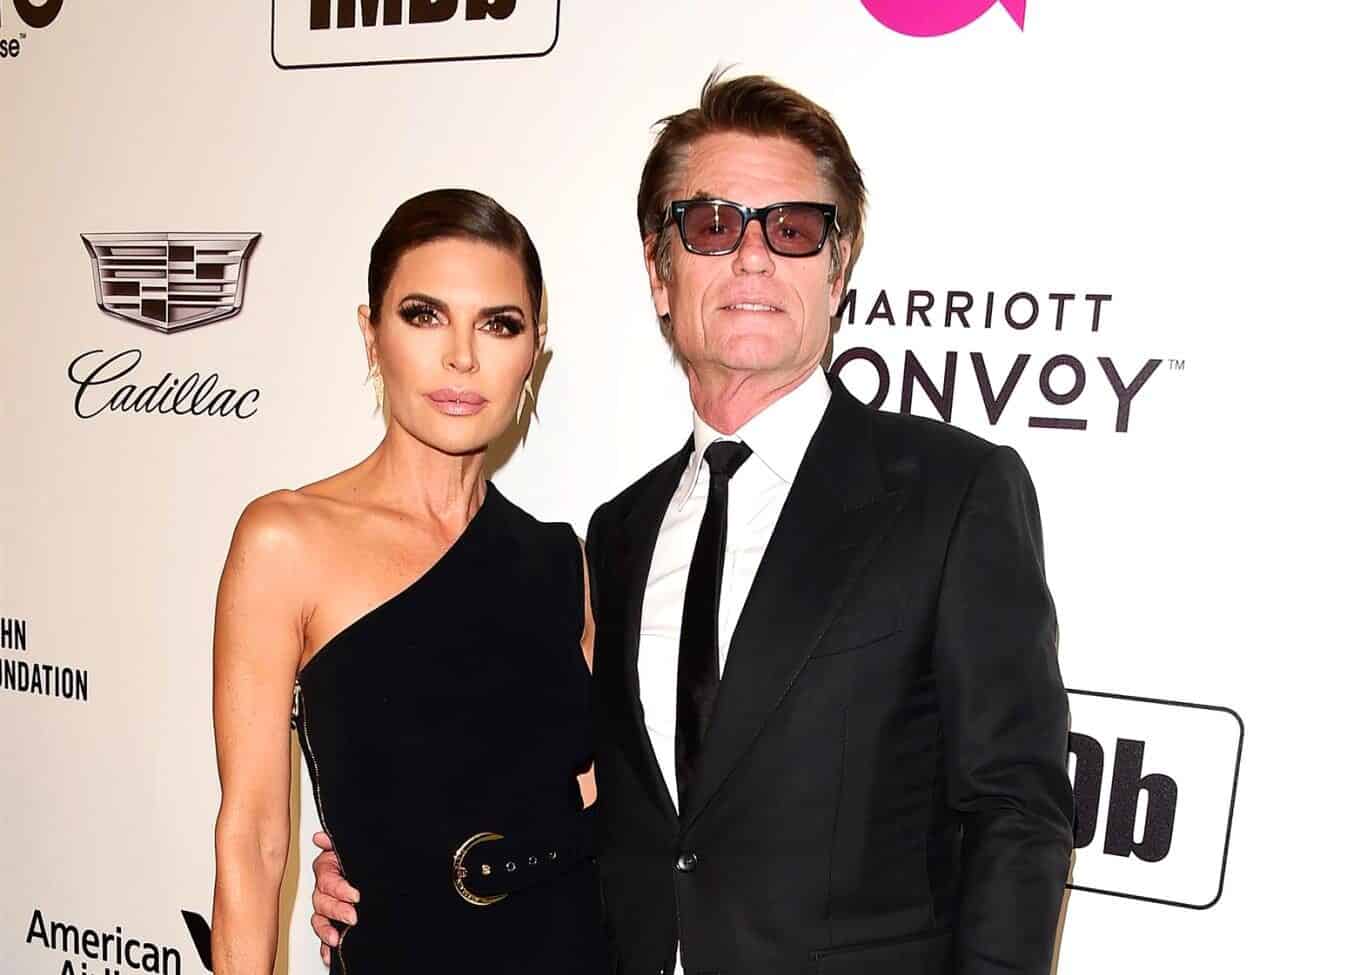 Harry Hamlin Shares Biggest Misconception About Lisa Rinna and What Got Her "Into a Lot of Trouble" on RHOBH, Plus His Marriage "Mantra" 